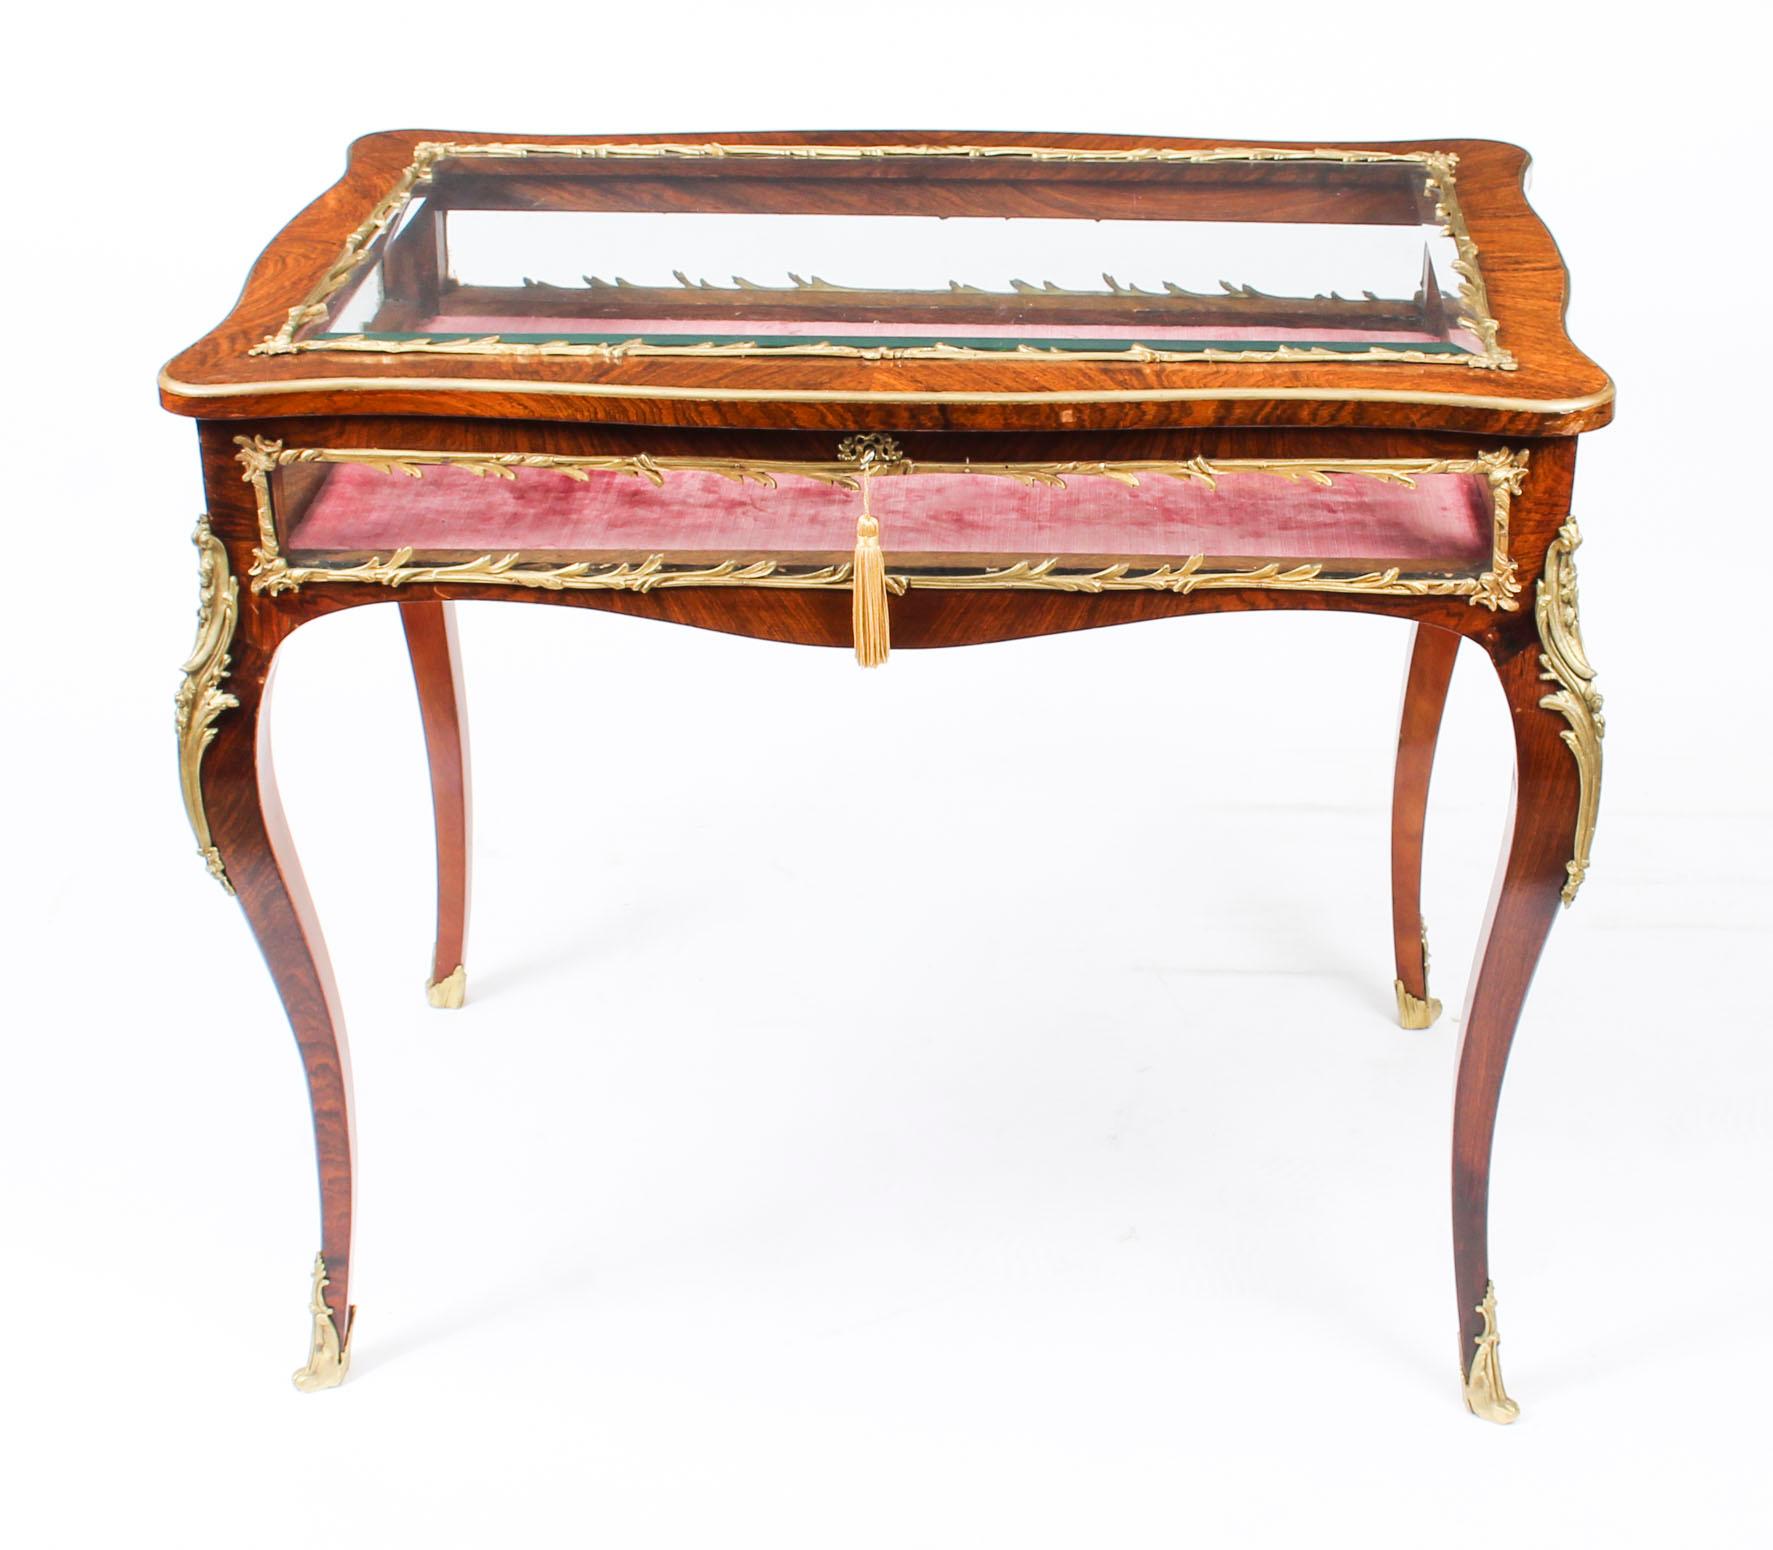 This is a beautiful antique French Gonçalo Alves and ormolu-mounted bijouterie display table in the Louis XV style, circa 1860 in date.

The display table features a bevelled glass top and glass sides, it has it's original pink velvet